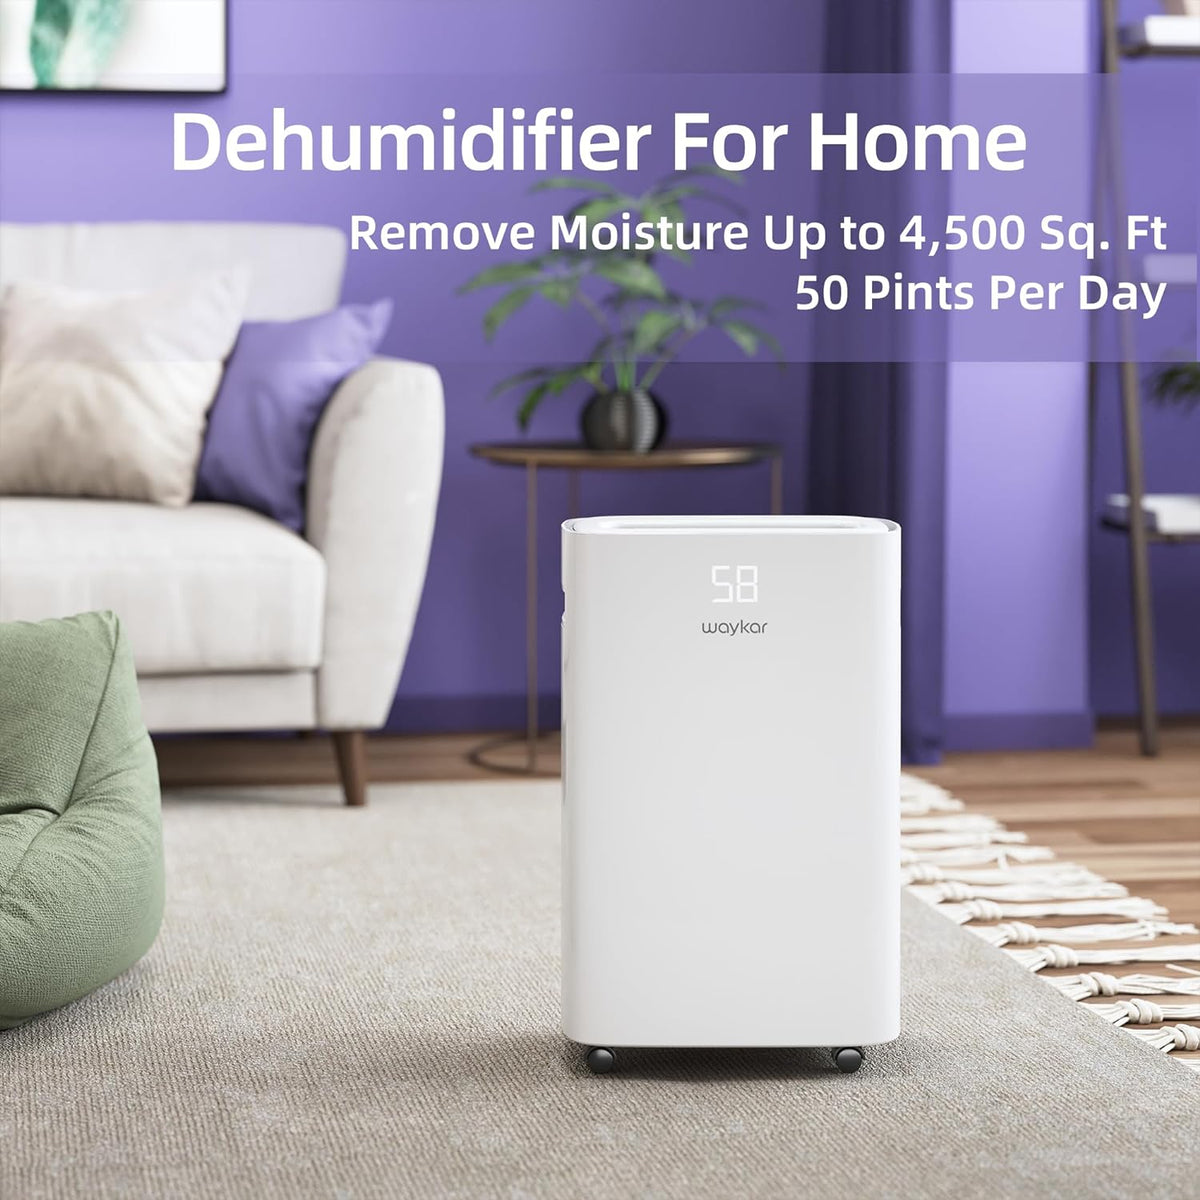 4500 Sq. Ft Dehumidifier for Home with Drain Hose for Bedrooms, Basements, Bathrooms, Laundry Rooms - with Intelligent Control Panel and Front Display, 24 Hr Timer and 0.66 Gallons Water Tank